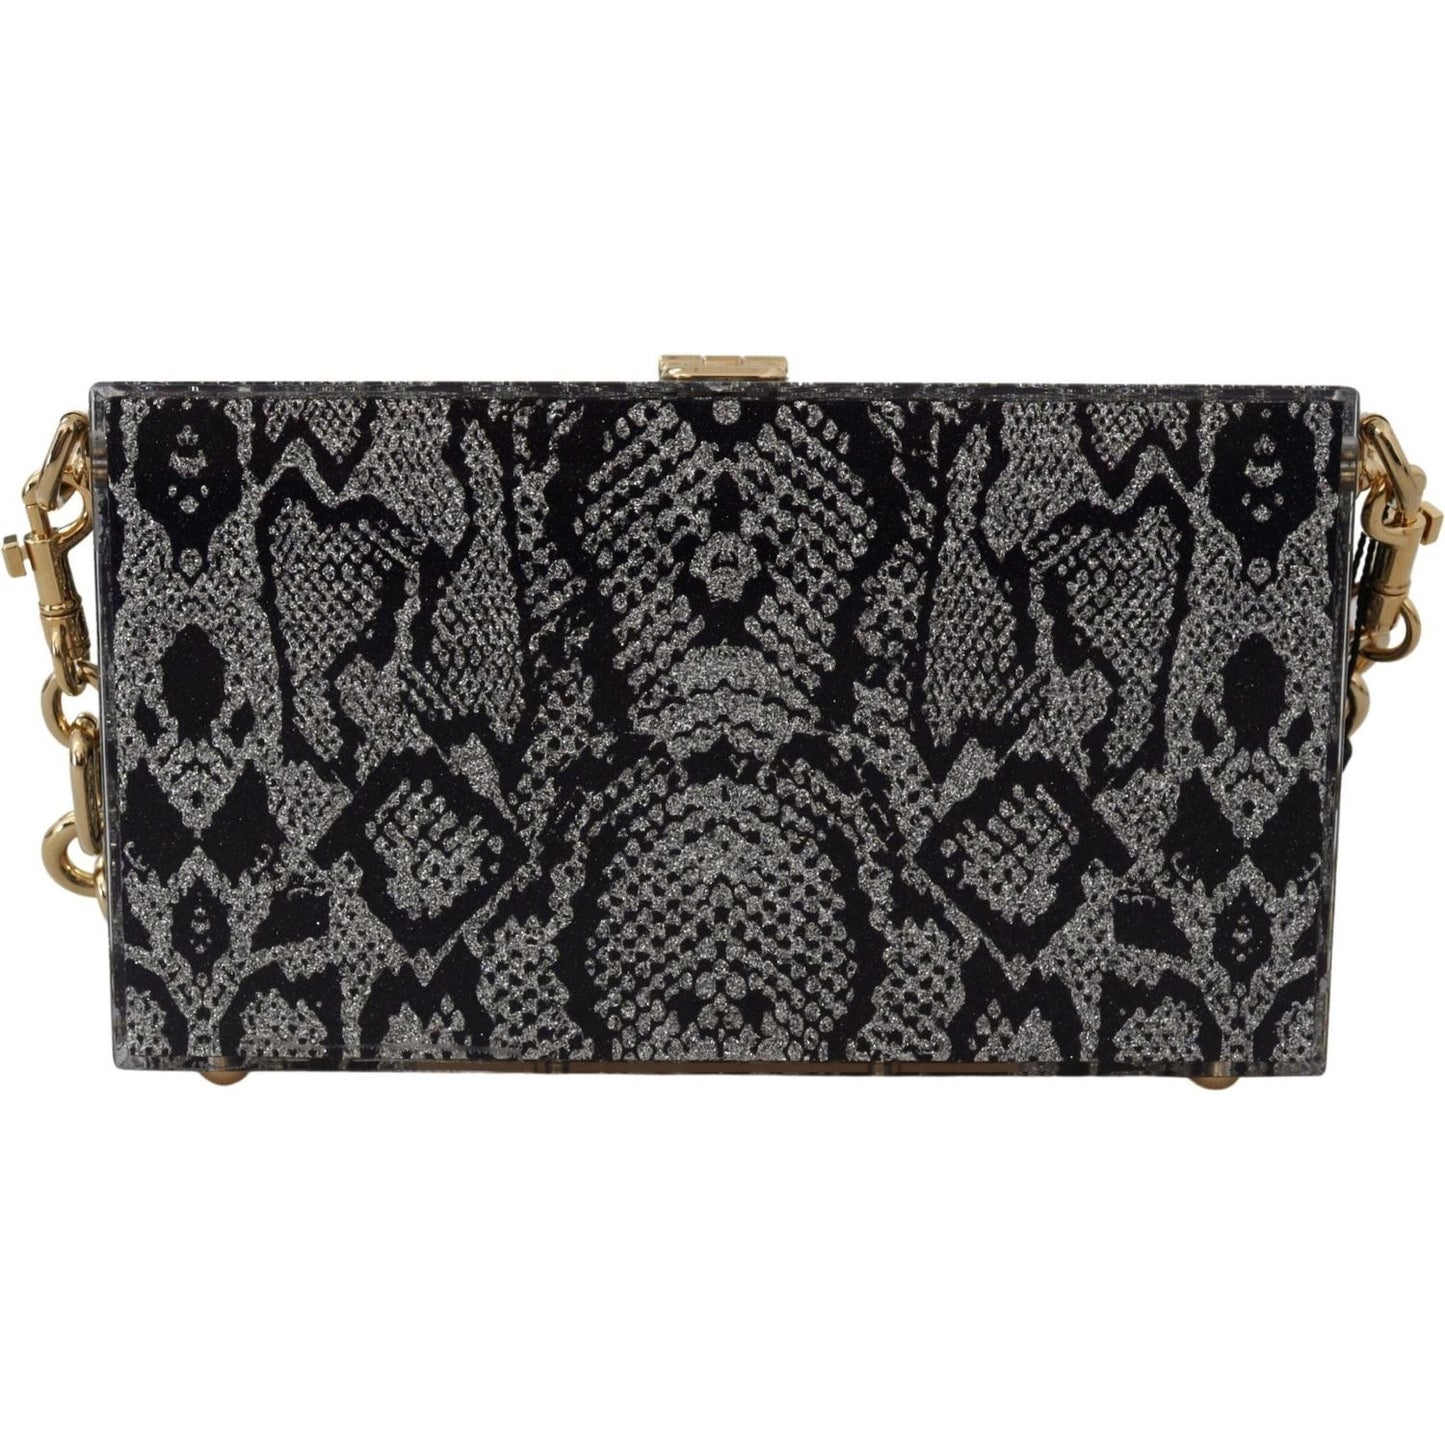 Dolce & Gabbana Gray Resin Dolce Box Clutch with Gold Details WOMAN SHOULDER BAGS gray-fashion-devotion-clutch-plexi-sicily-box-purse IMG_1511-scaled-a58e7806-fa9.jpg